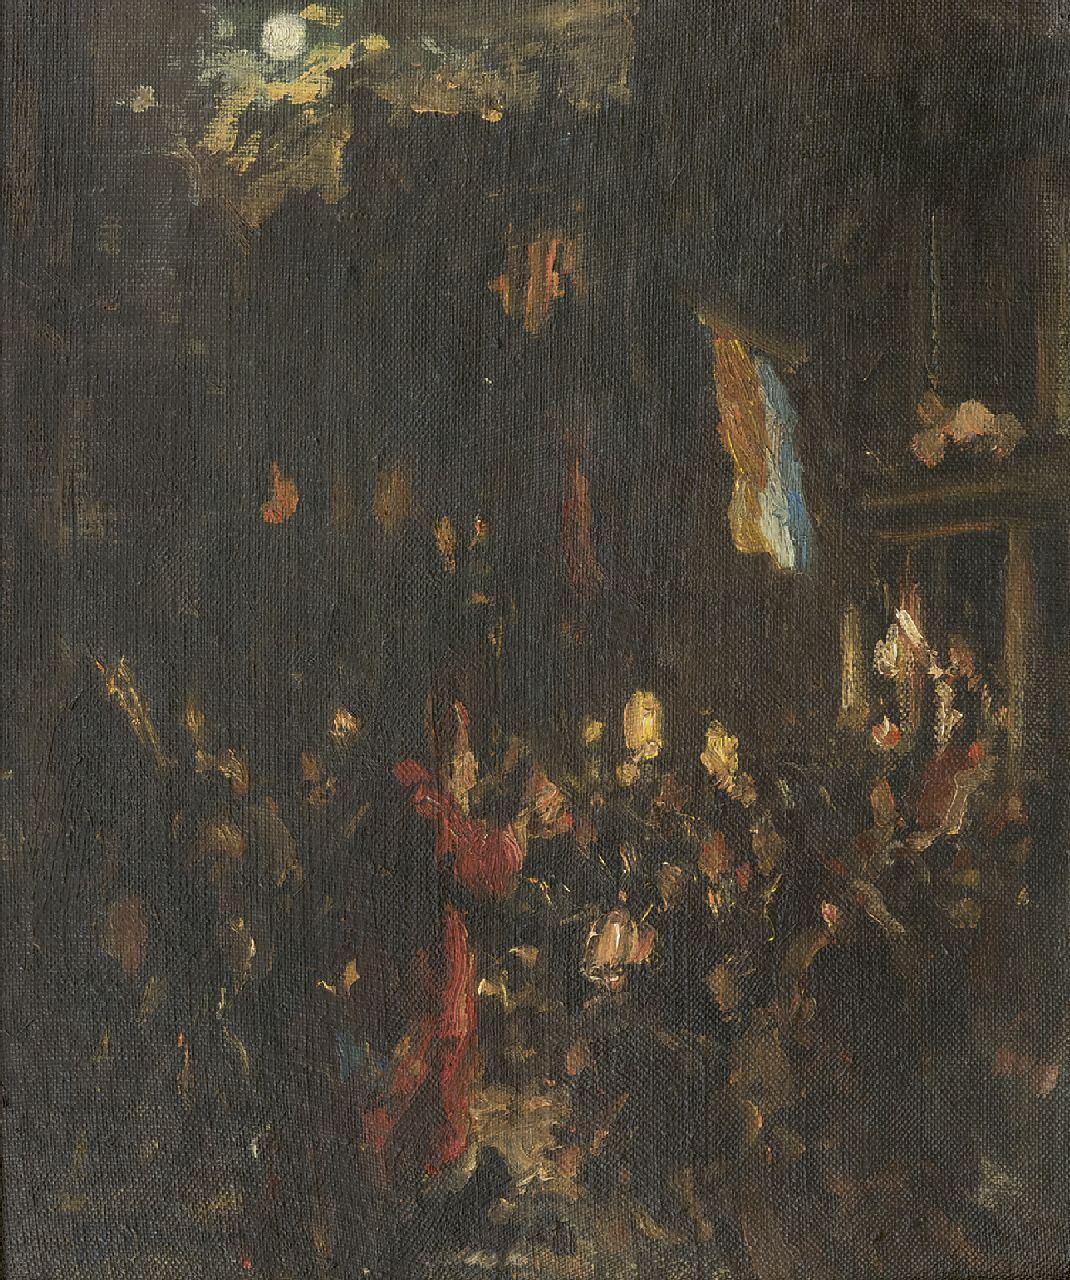 Staller G.J.  | Gerard Johan Staller | Paintings offered for sale | Celebrating Sint Nicolaas in Amsterdam, oil on canvas laid down on board 29.4 x 25.0 cm, signed l.l.